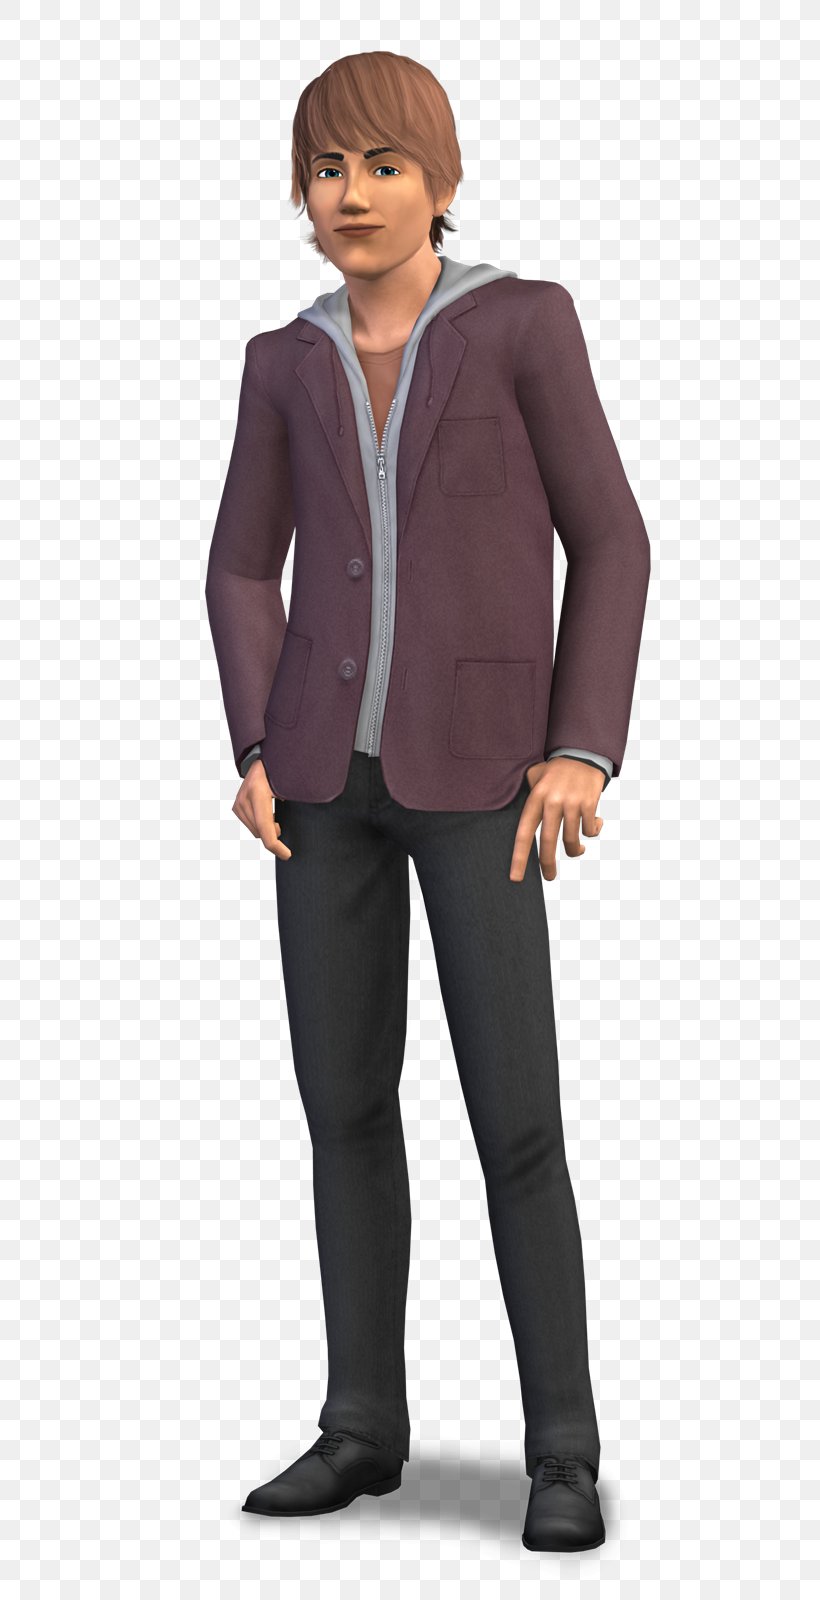 The Sims 3 The Sims 4 The Sims 2 PlayStation 3, PNG, 769x1600px, Sims 3, Blazer, Business, Businessperson, Clothing Download Free